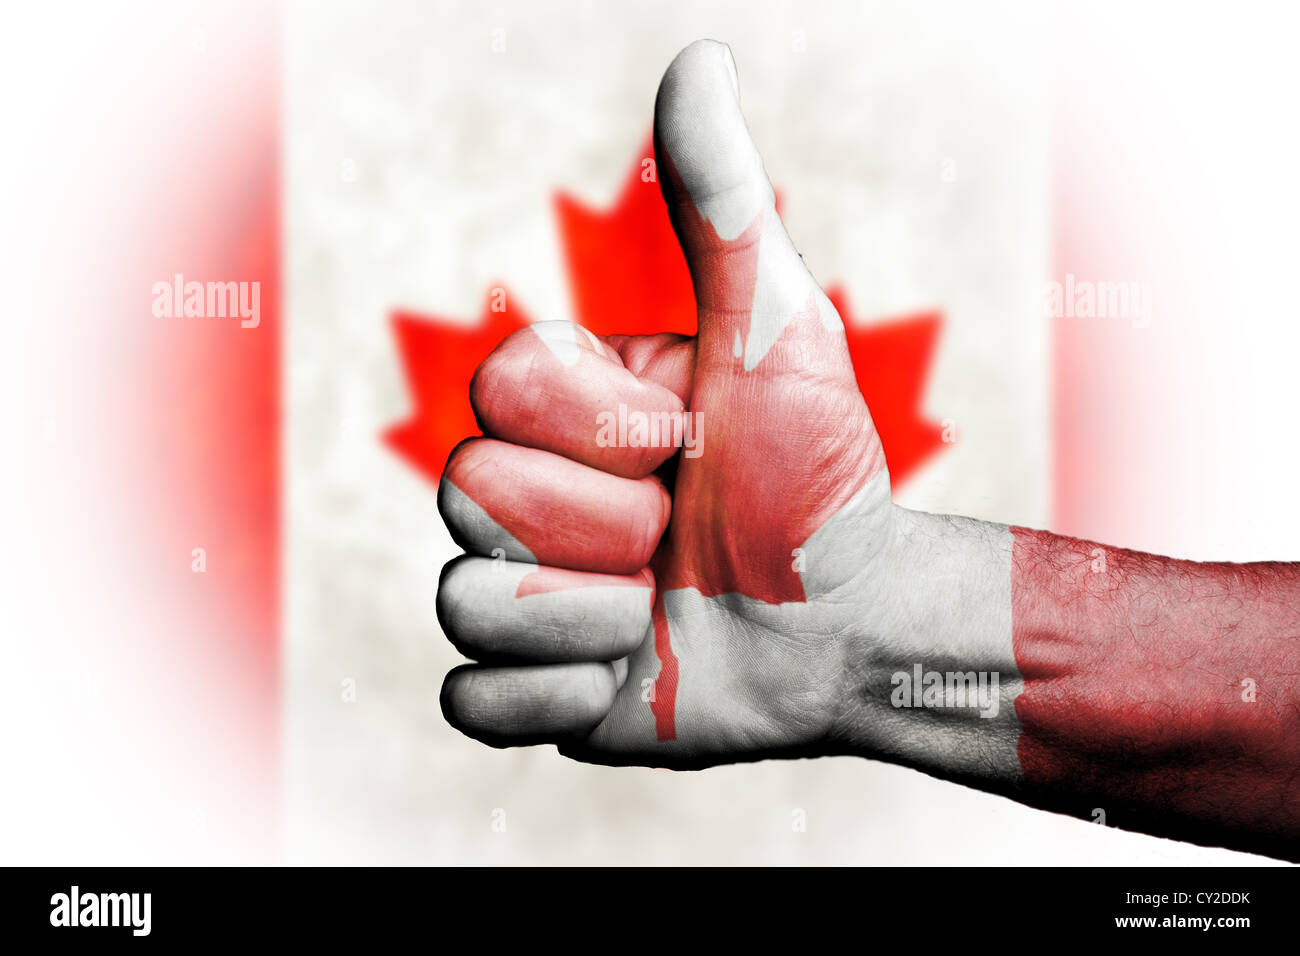 Thumbs up for to Canada Canadians, sporting metaphor we are going to win prevail,vote of confidence for country and people. Stock Photo